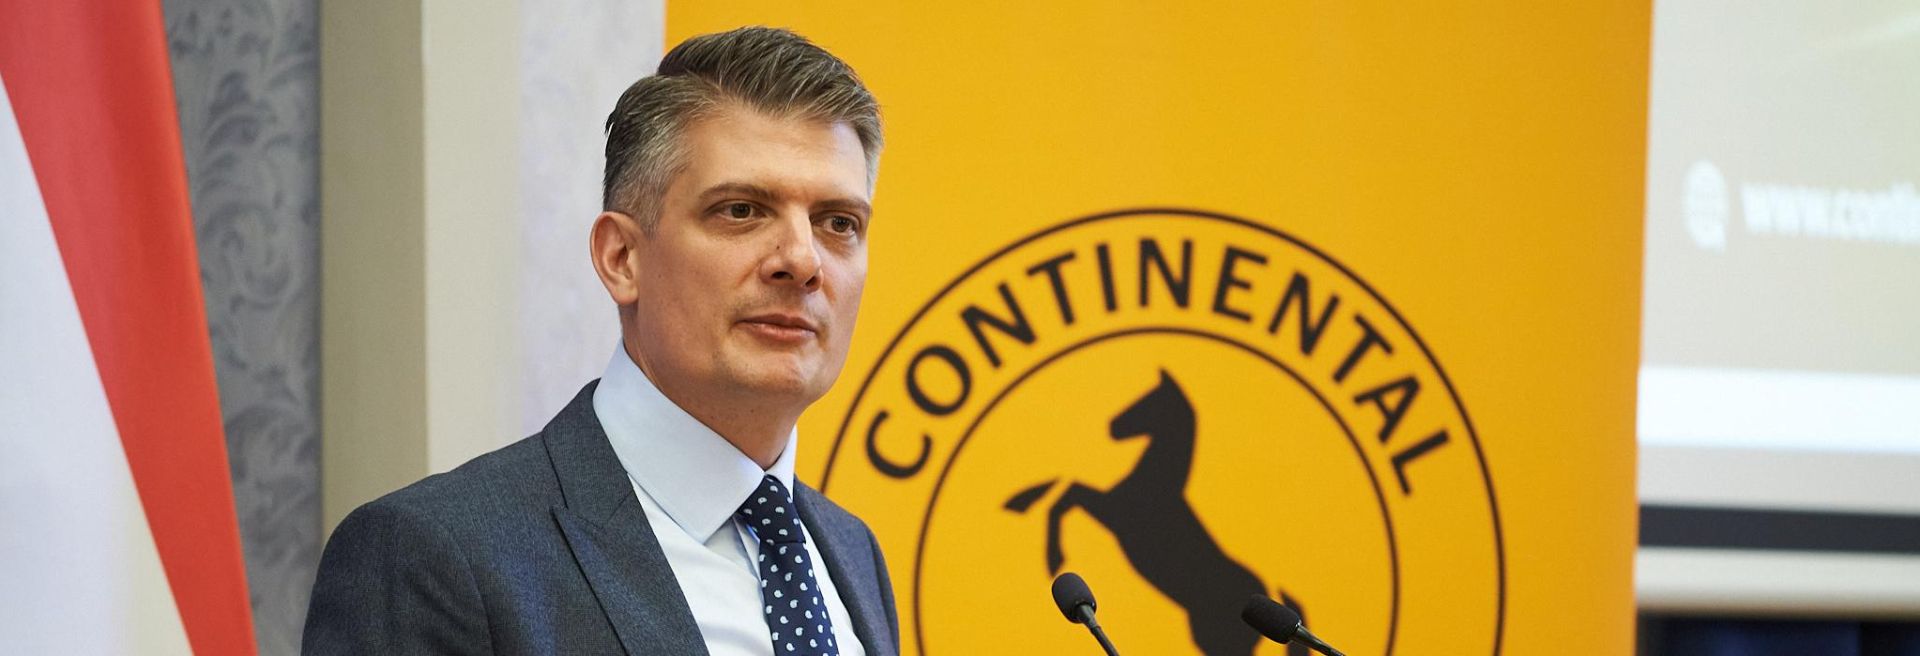 Continental to Launch Massive R&D Investments to Stay Ahead in the AI Race